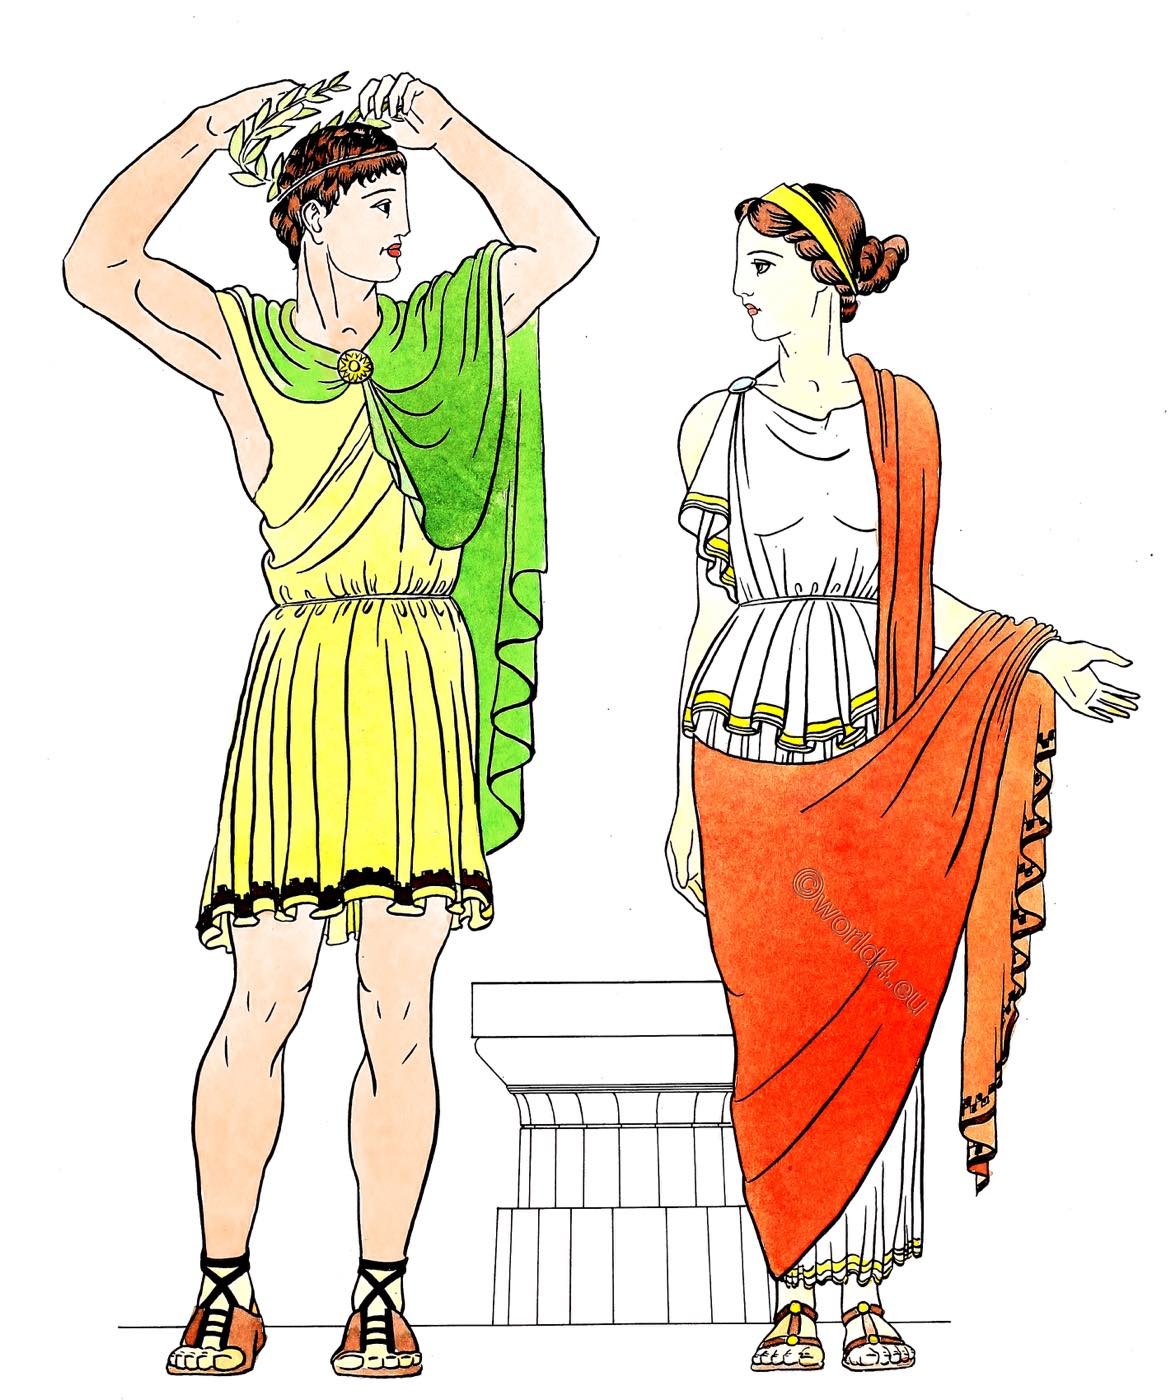 Byzantine fashion history. Costumes and modes from 5th to 6th